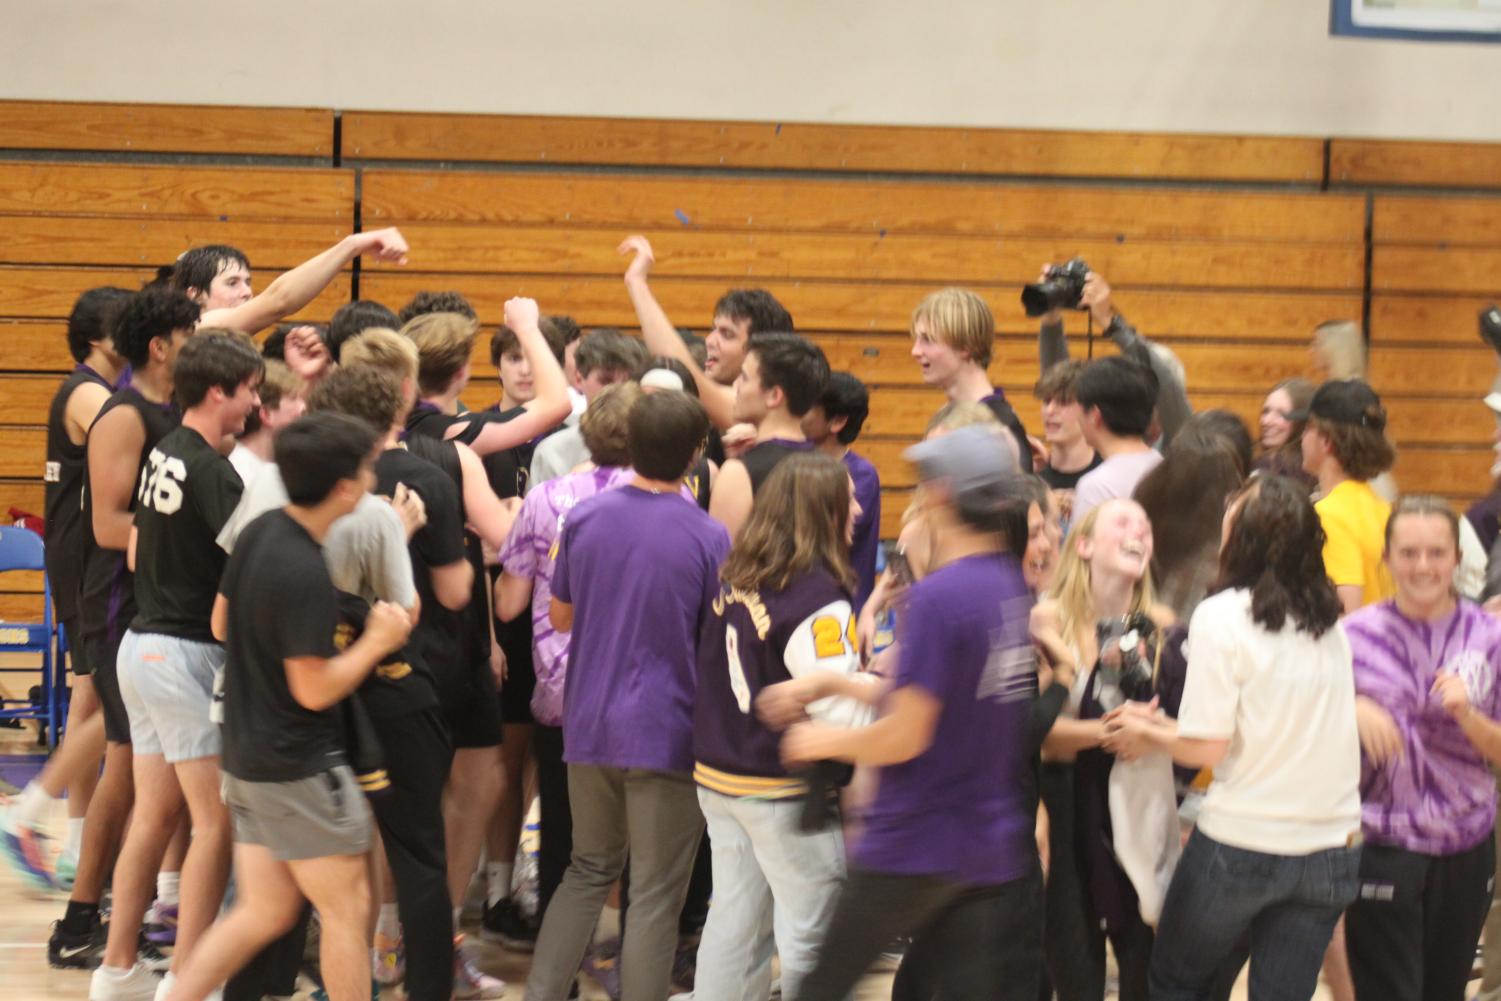 Amador+Boys+Varsity+Volleyball+Defeats+Foothill+3-1+to+become+NCS+Champions